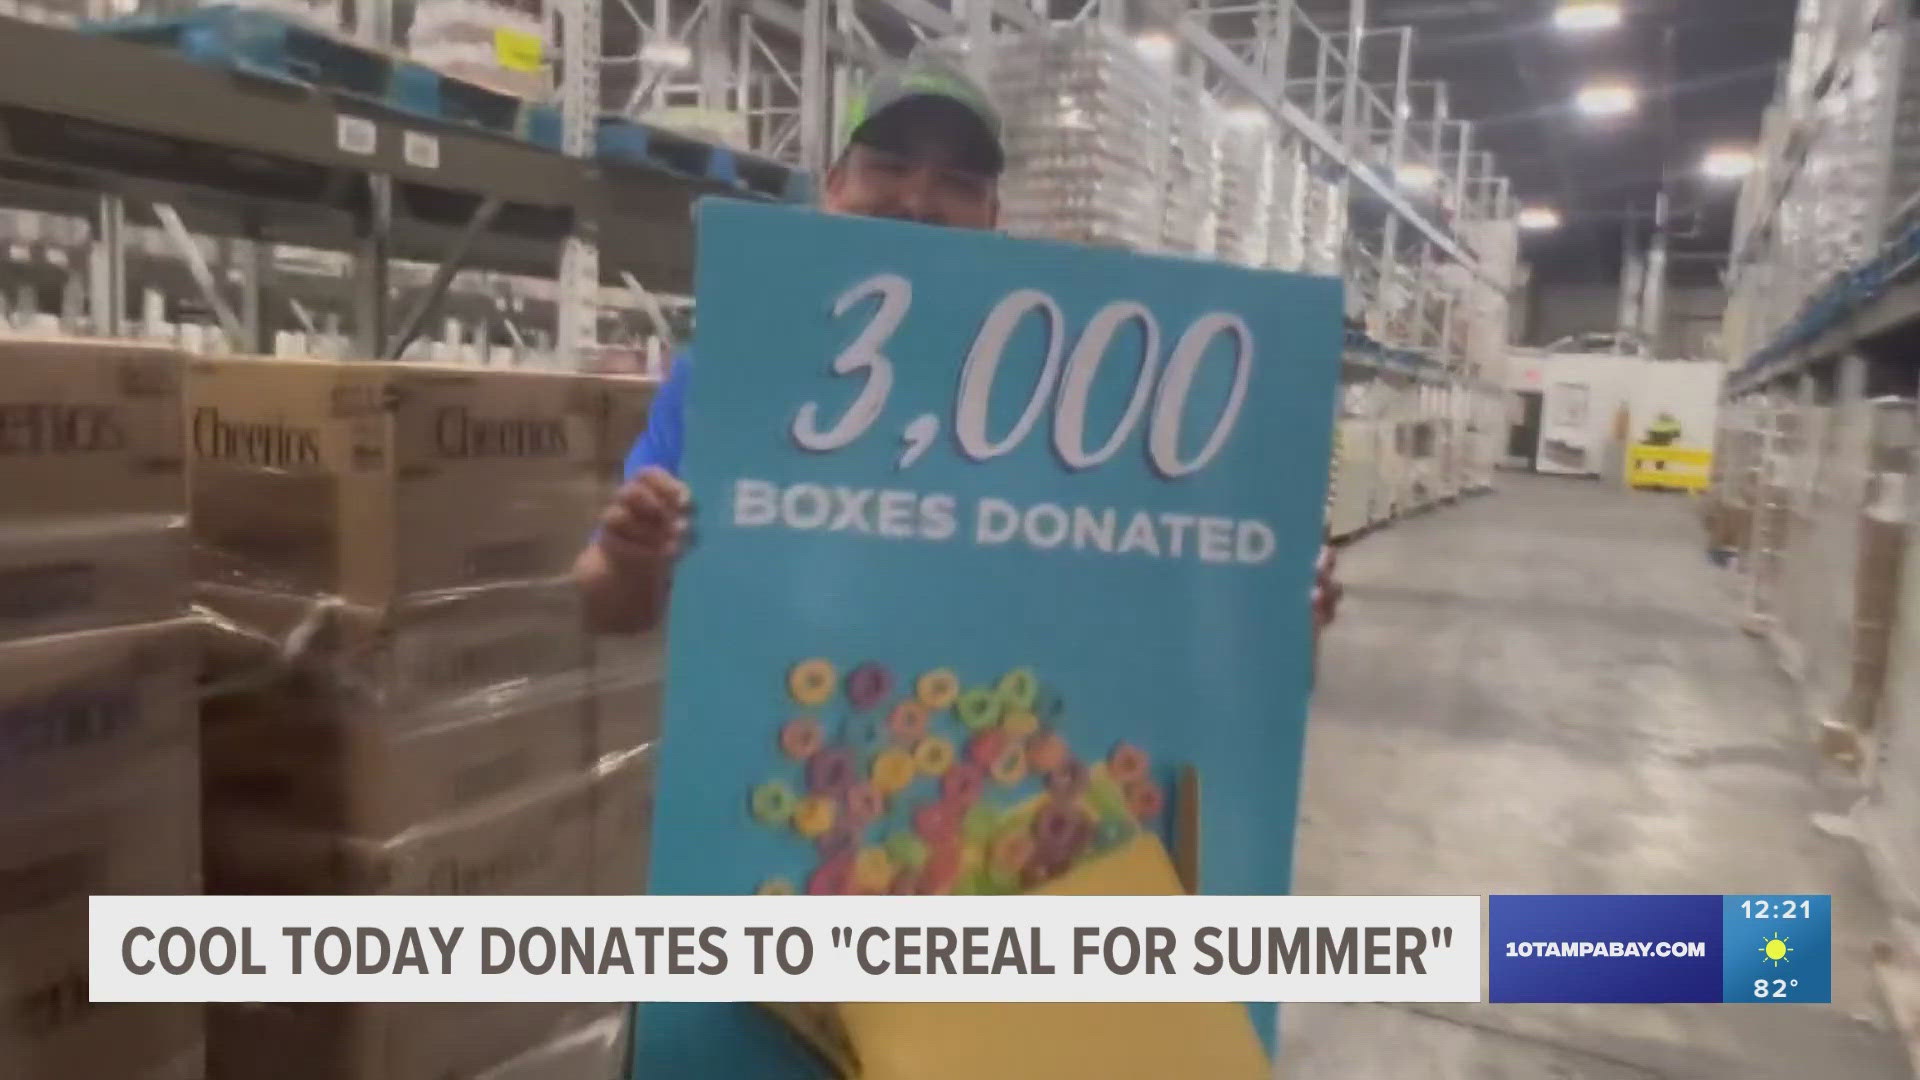 Cool Today partnered with 10 Tampa Bay for Cereal for Summer, and the company and its customers really turned up the heat to help feed hungry kids.